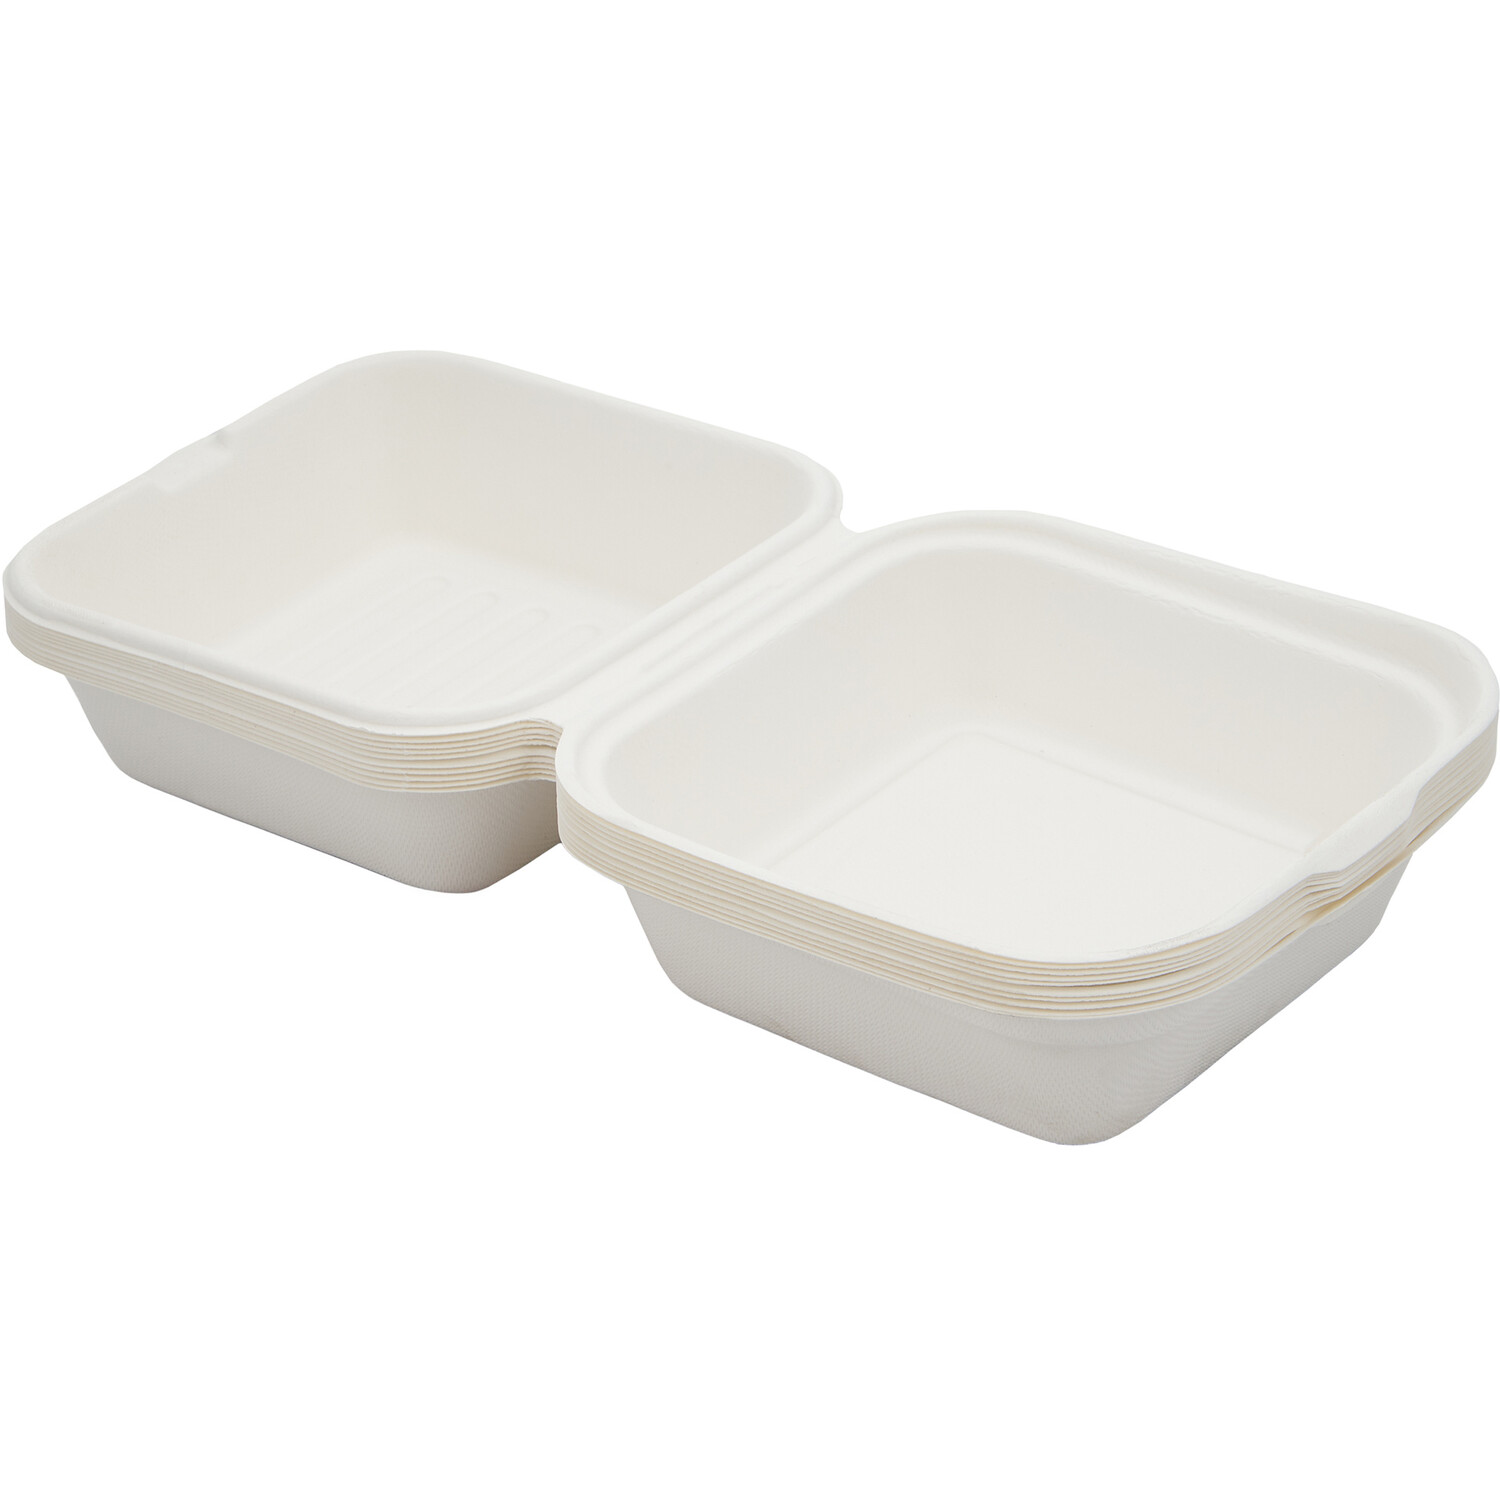 Pack of 10 Bagasse Burger Boxes - White Image 2